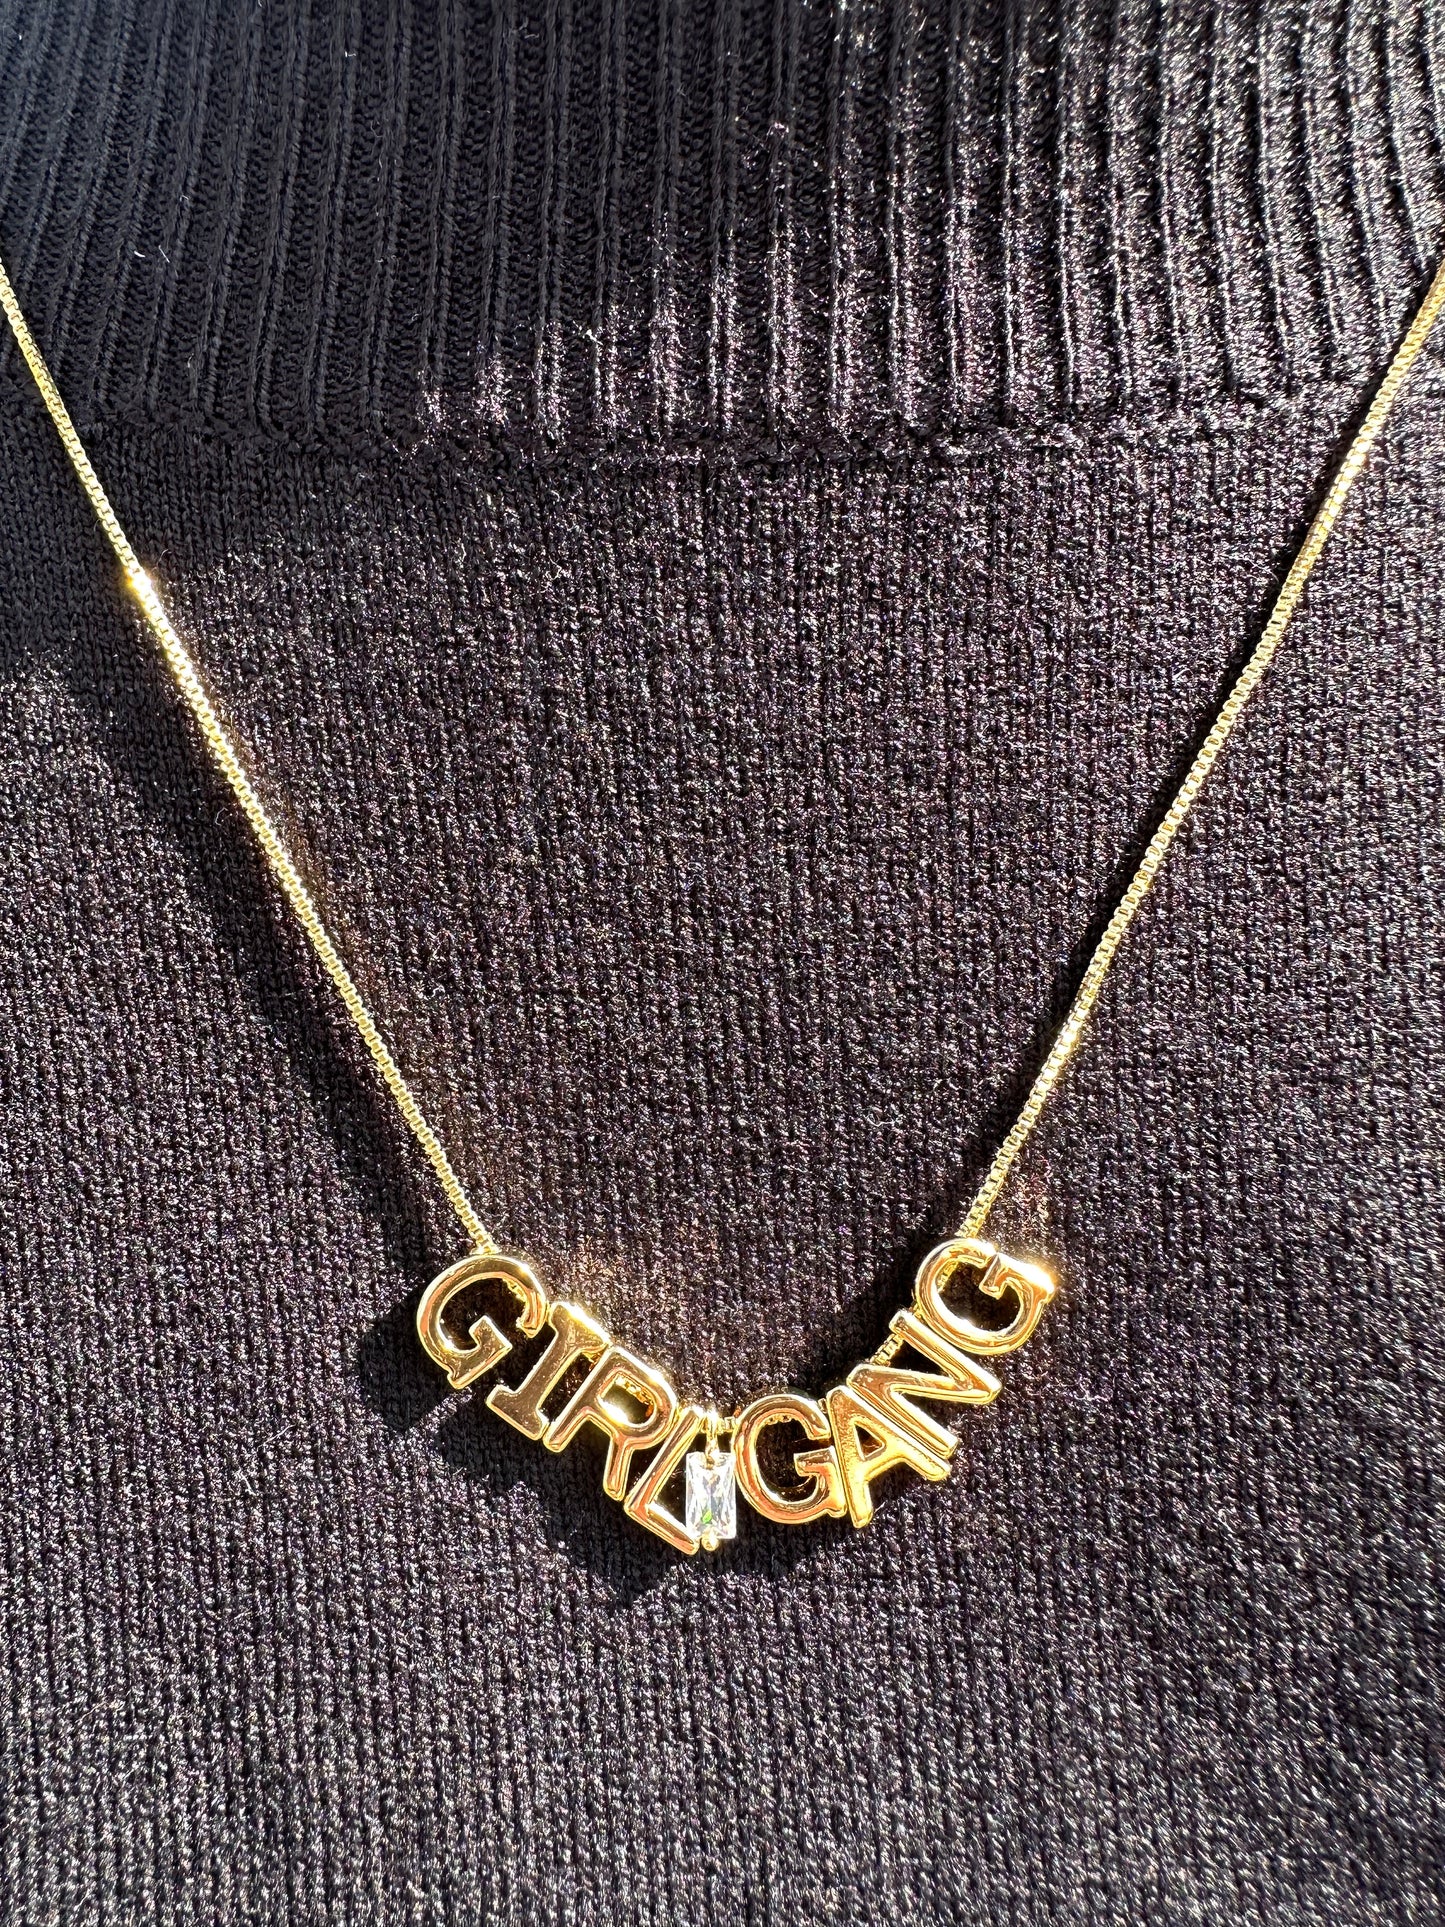 The Girl Gang & Co. Exclusive Necklace